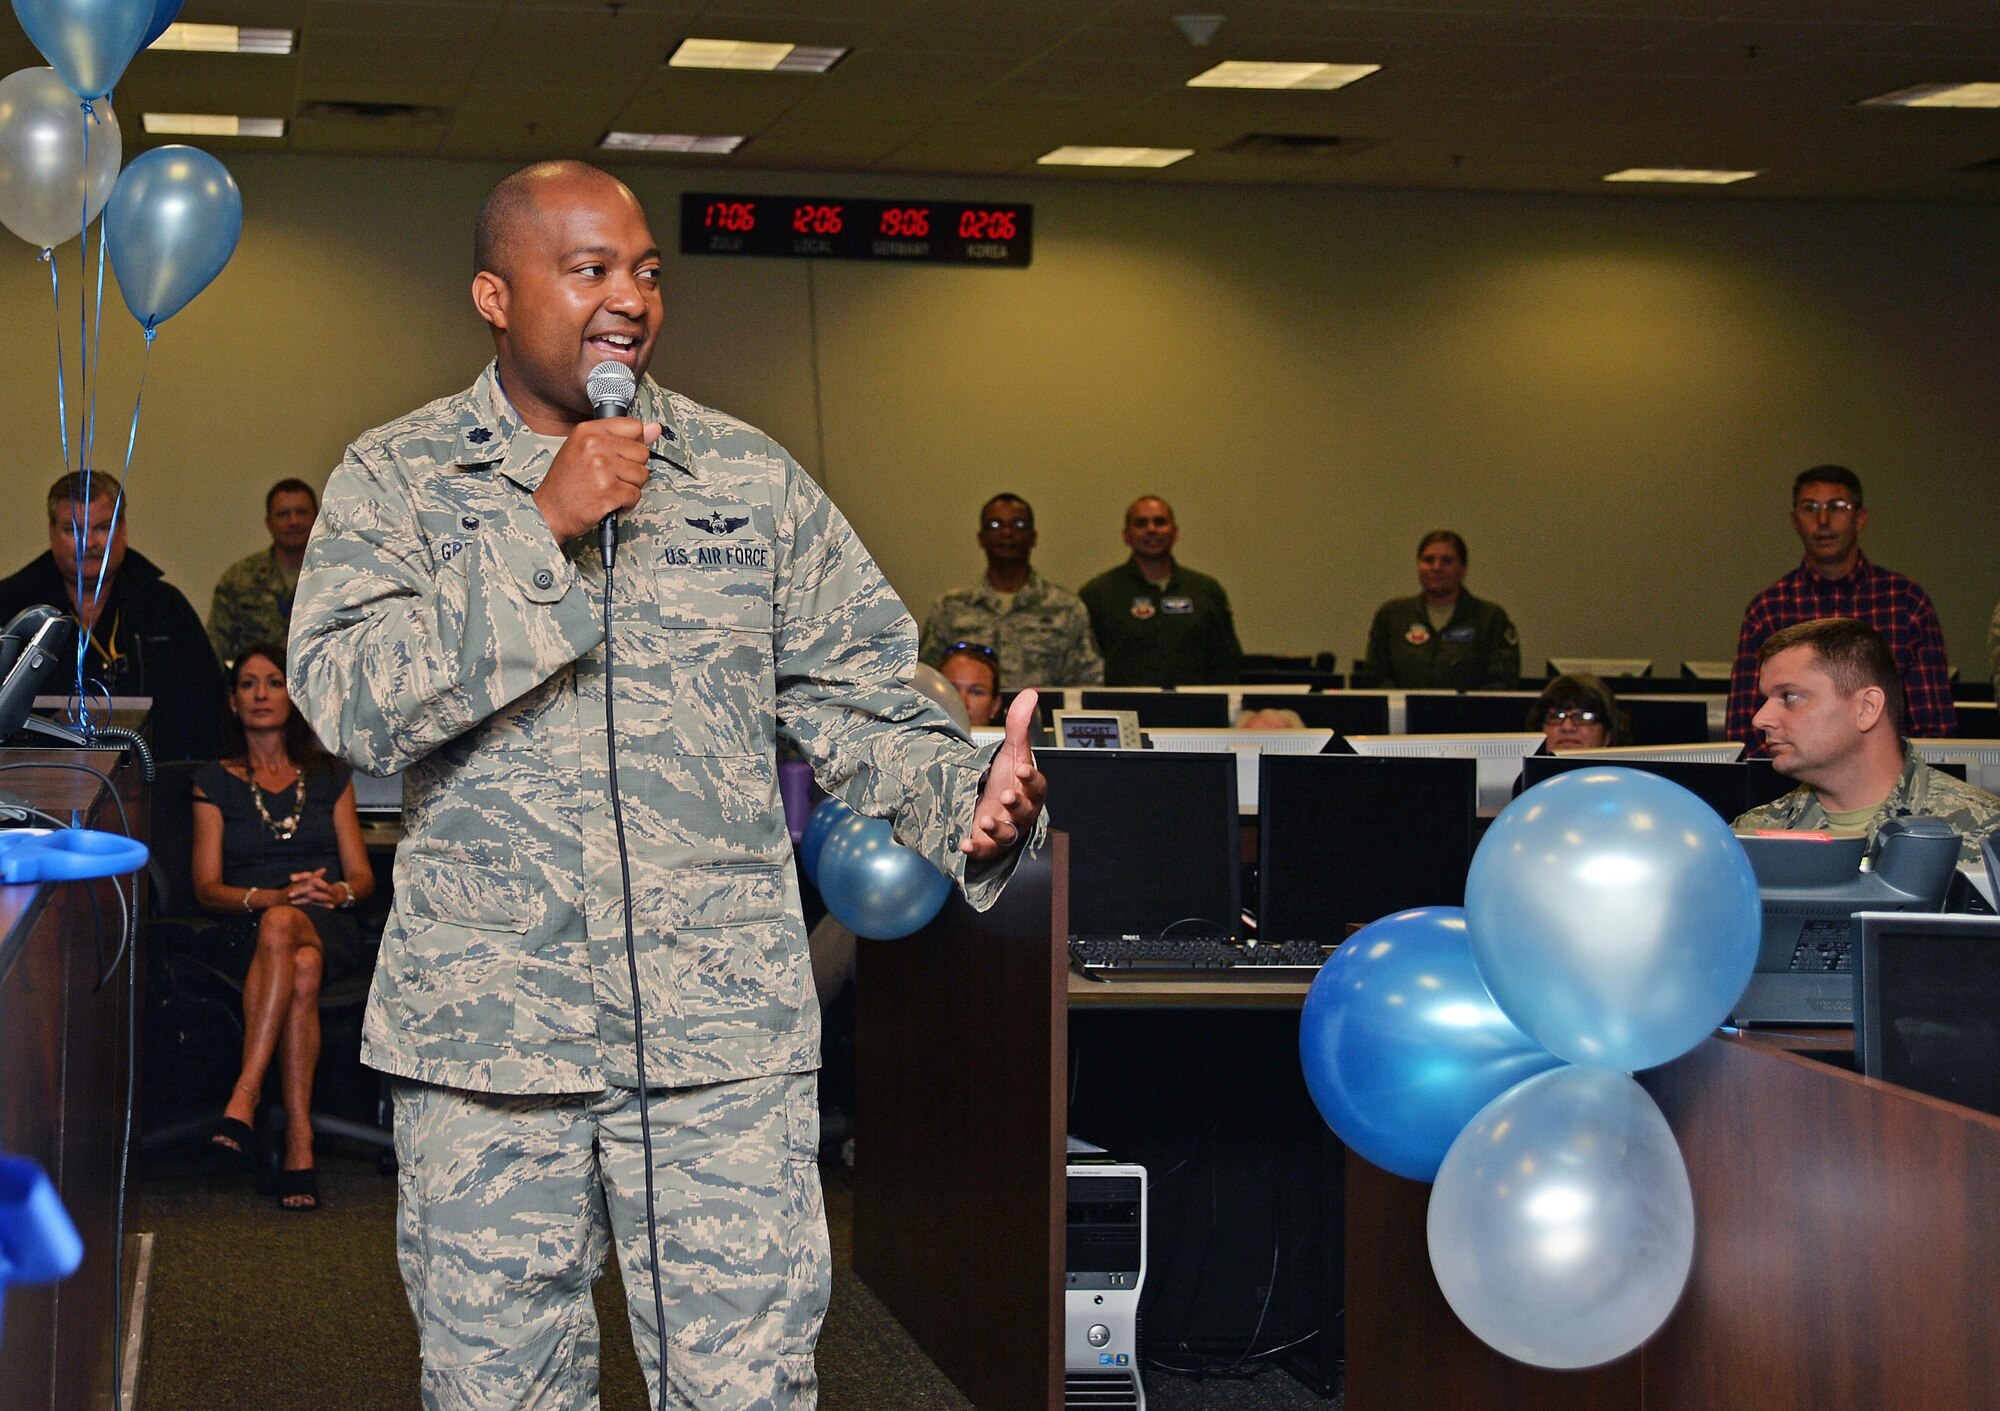 Lt. Col. Merrick Green, commander of the 505th Combat Training Squadron, speaks during a ribbon cutting ceremony for the re-opening of the Air Component Control Facility at Hurlburt Field, Fla., June 27, 2016. The 505th CTS is a tenant unit located on Hurlburt Field, which conducts virtual exercises to train military members in planning and execution of joint operations across the Department of Defense.  (U.S. Air Force photo by Senior Airman Andrea Posey)